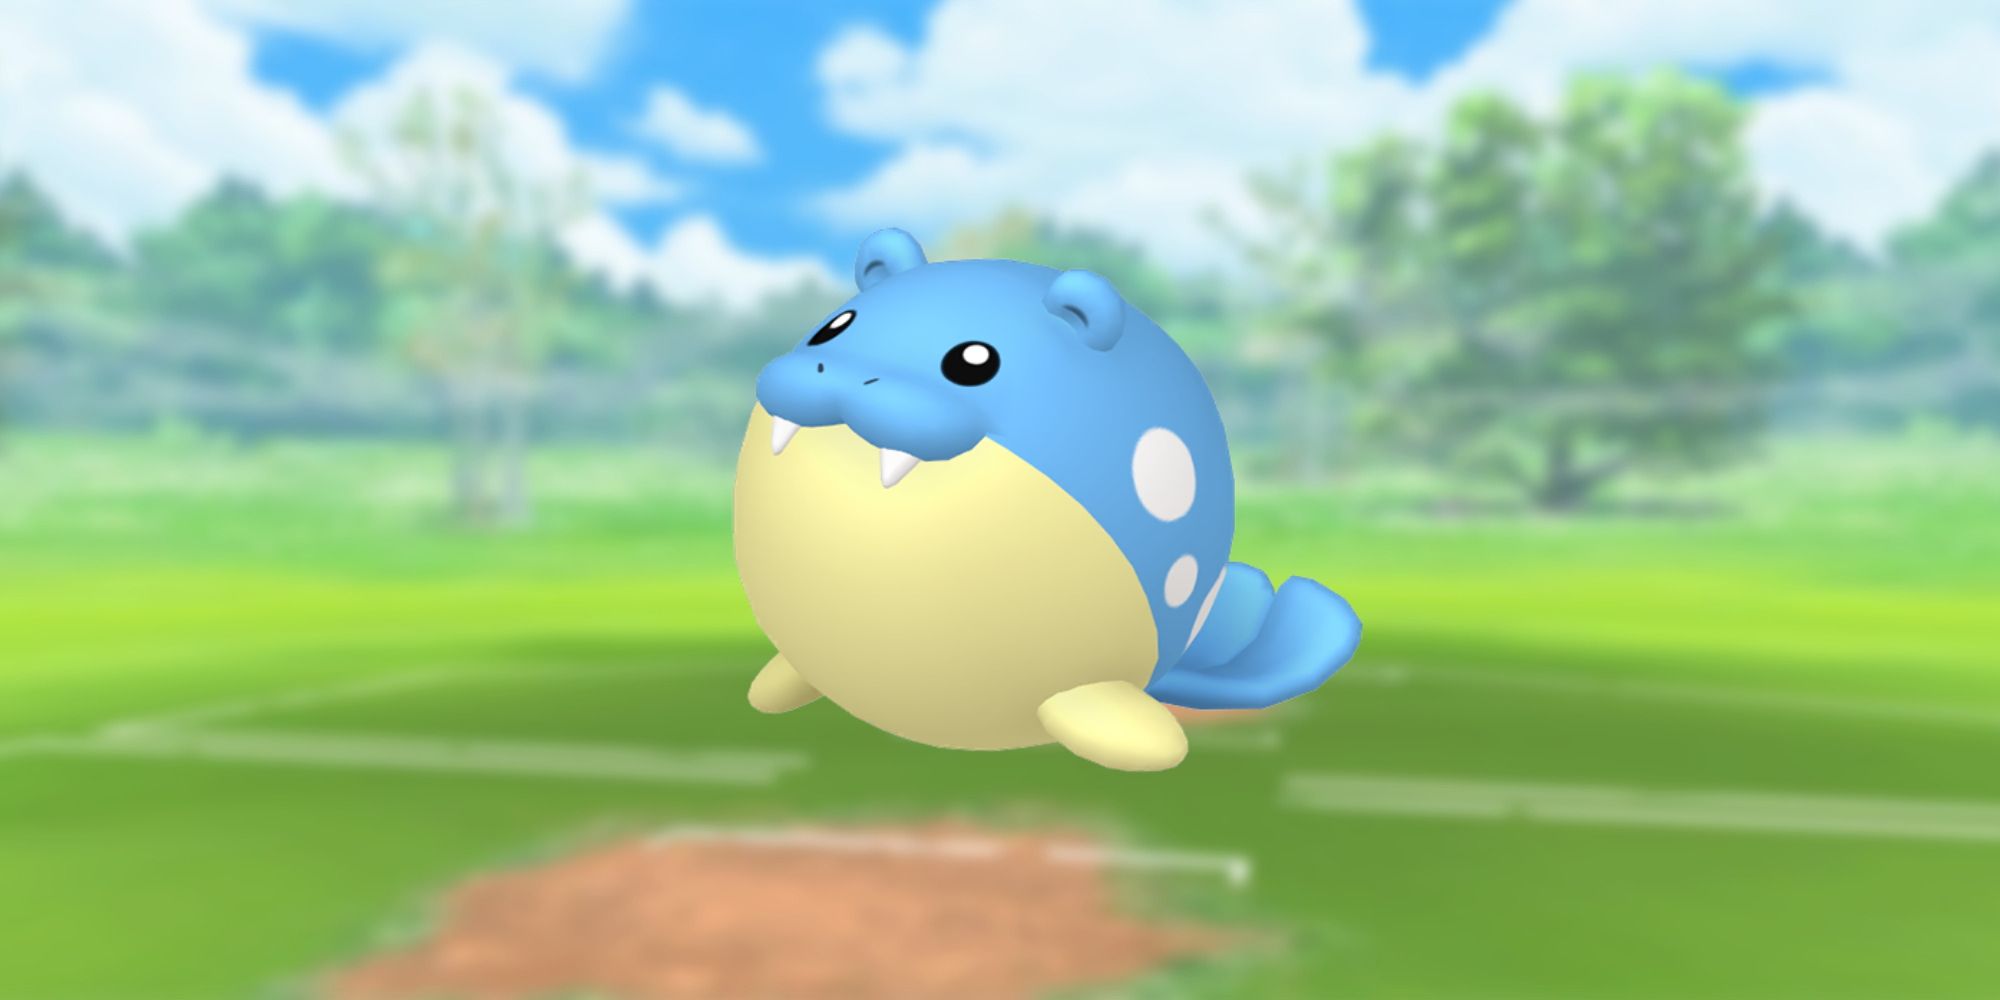 Spheal from Pokemon with the Pokemon Go battlefield as the background